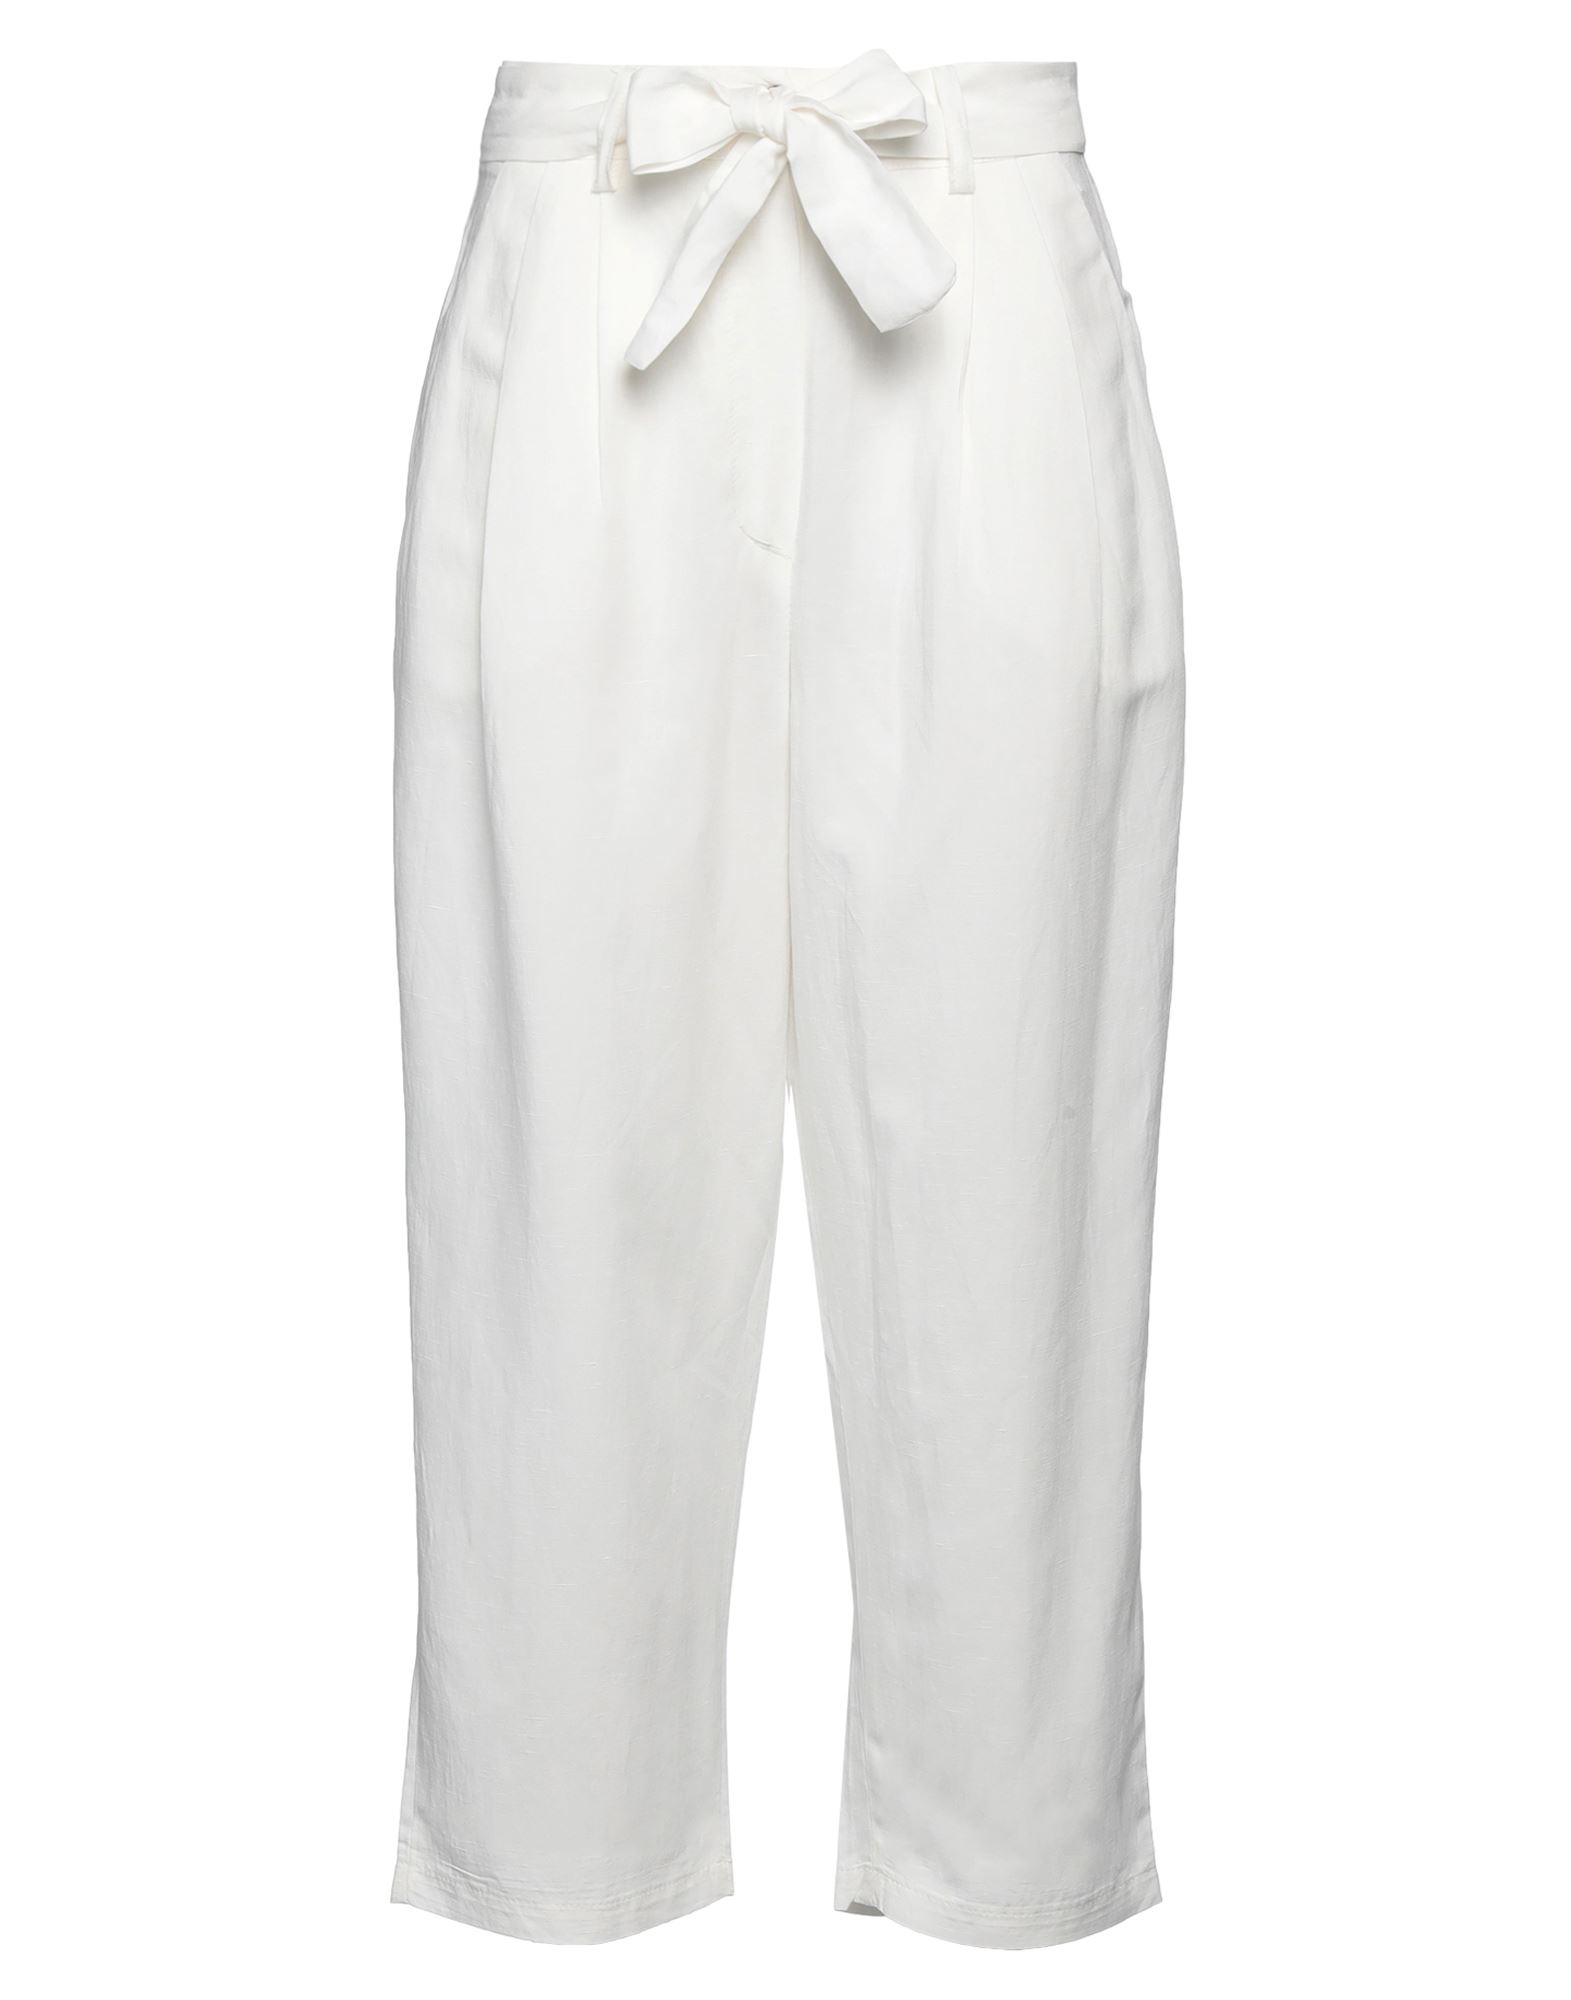 White Wise Pants